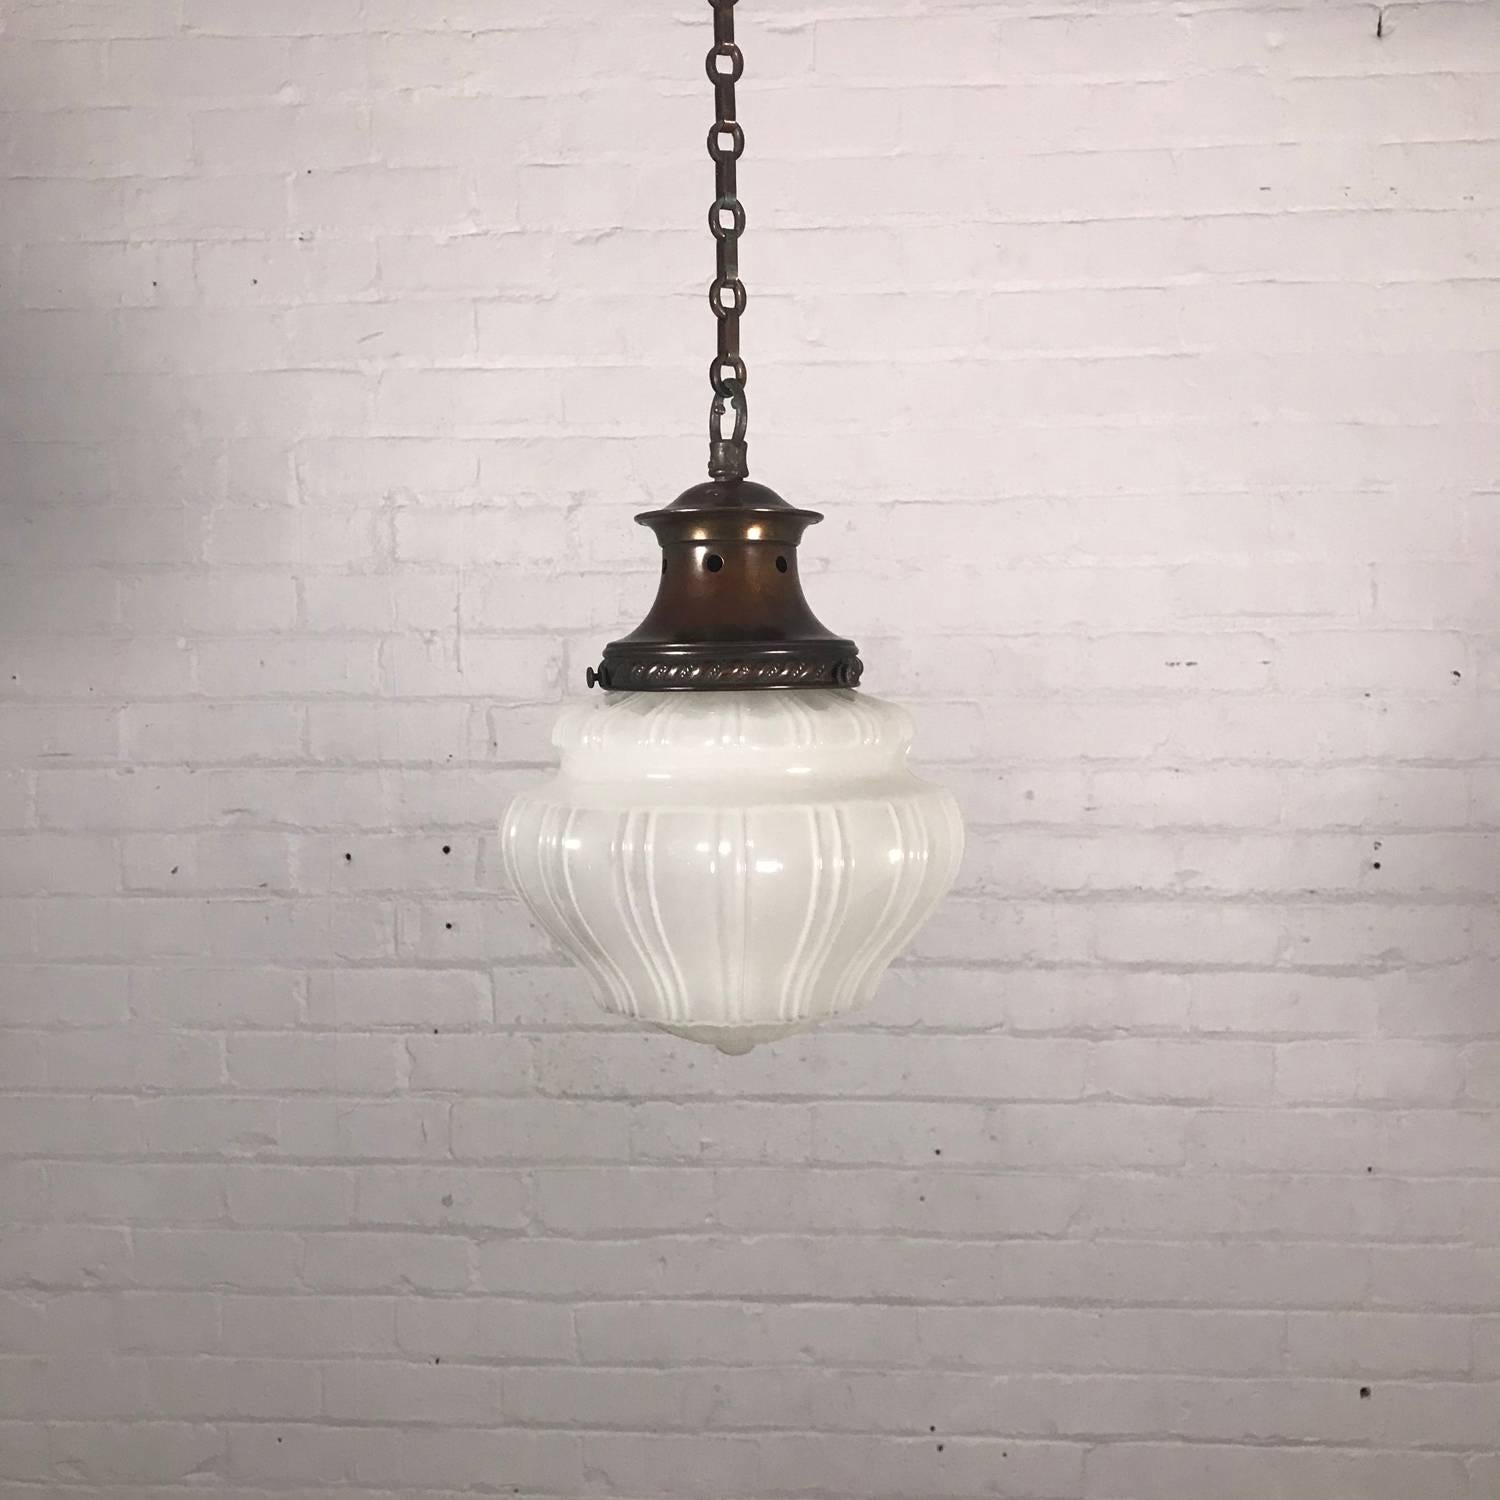 Early 20th century opal glass pendant light, with anodised copper gallery and chain. Stamped 'Made in England'
Measures: 23cm / 9